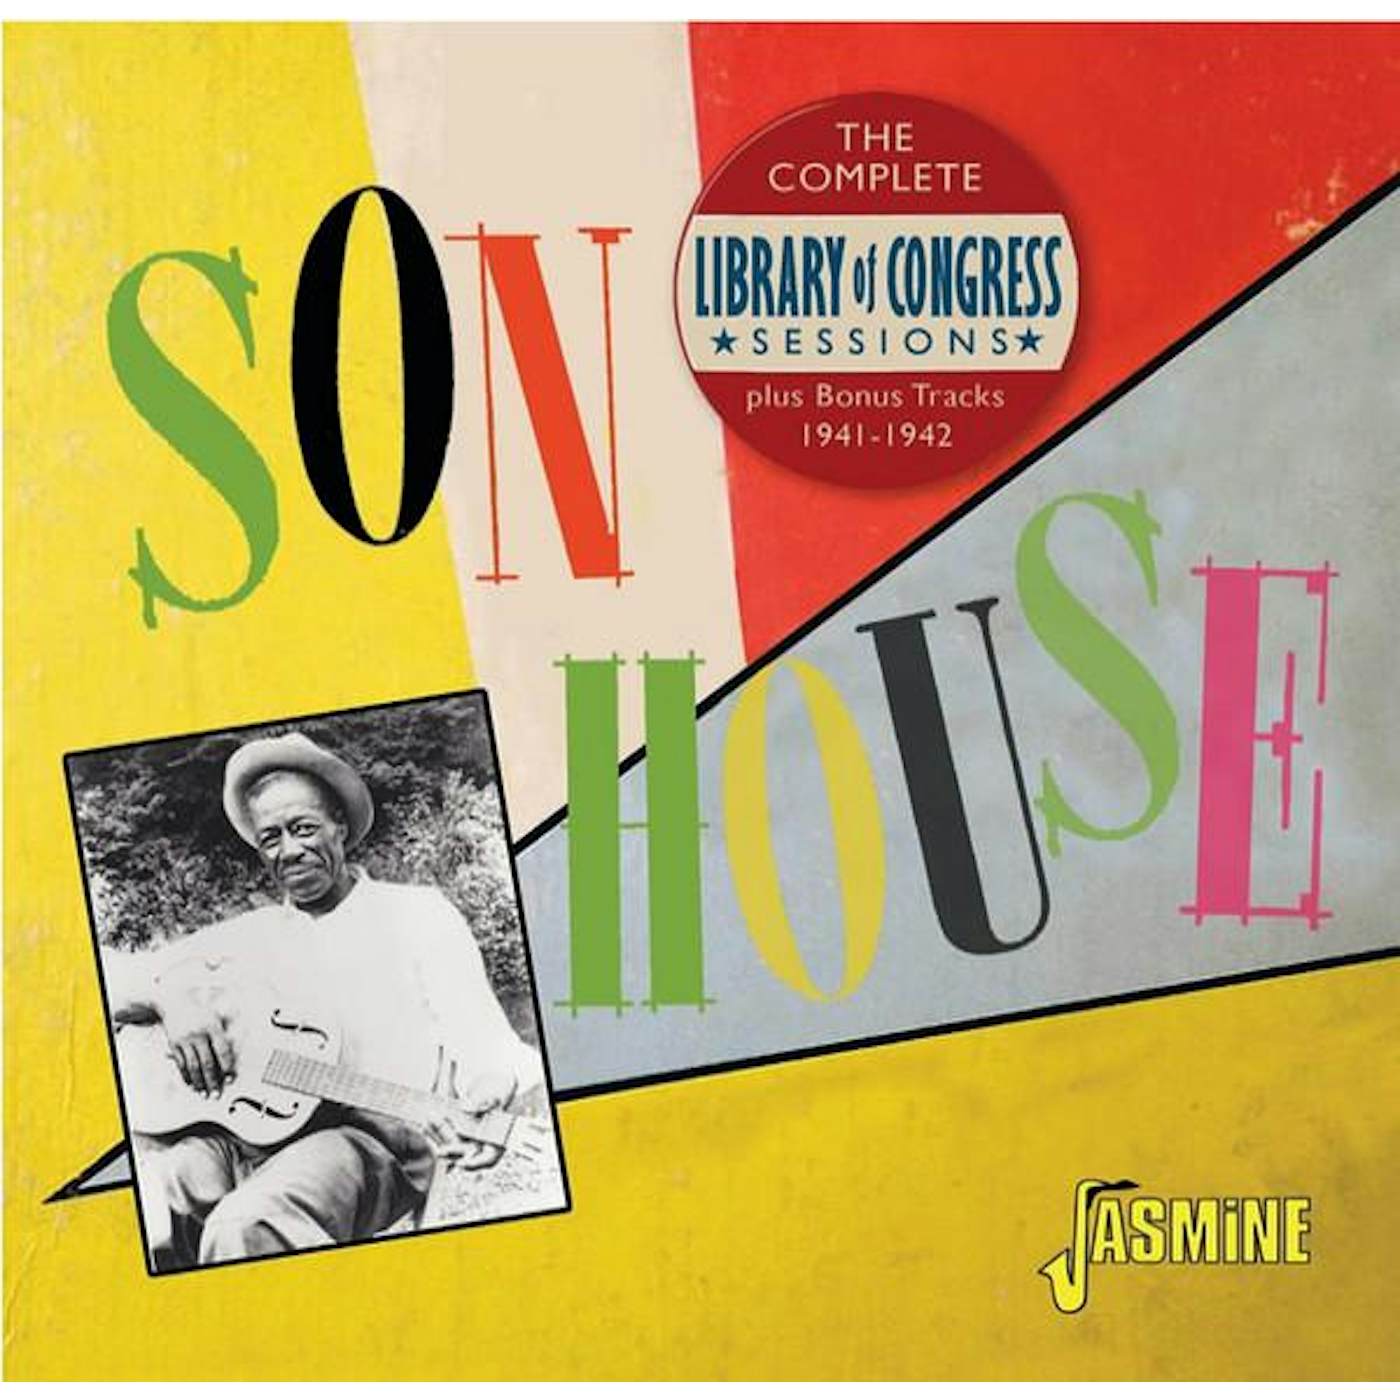 Son House COMPLETE LIBRARY OF CONGRESS SESSIONS PLUS BONUS TRACKS 1941-1942 CD